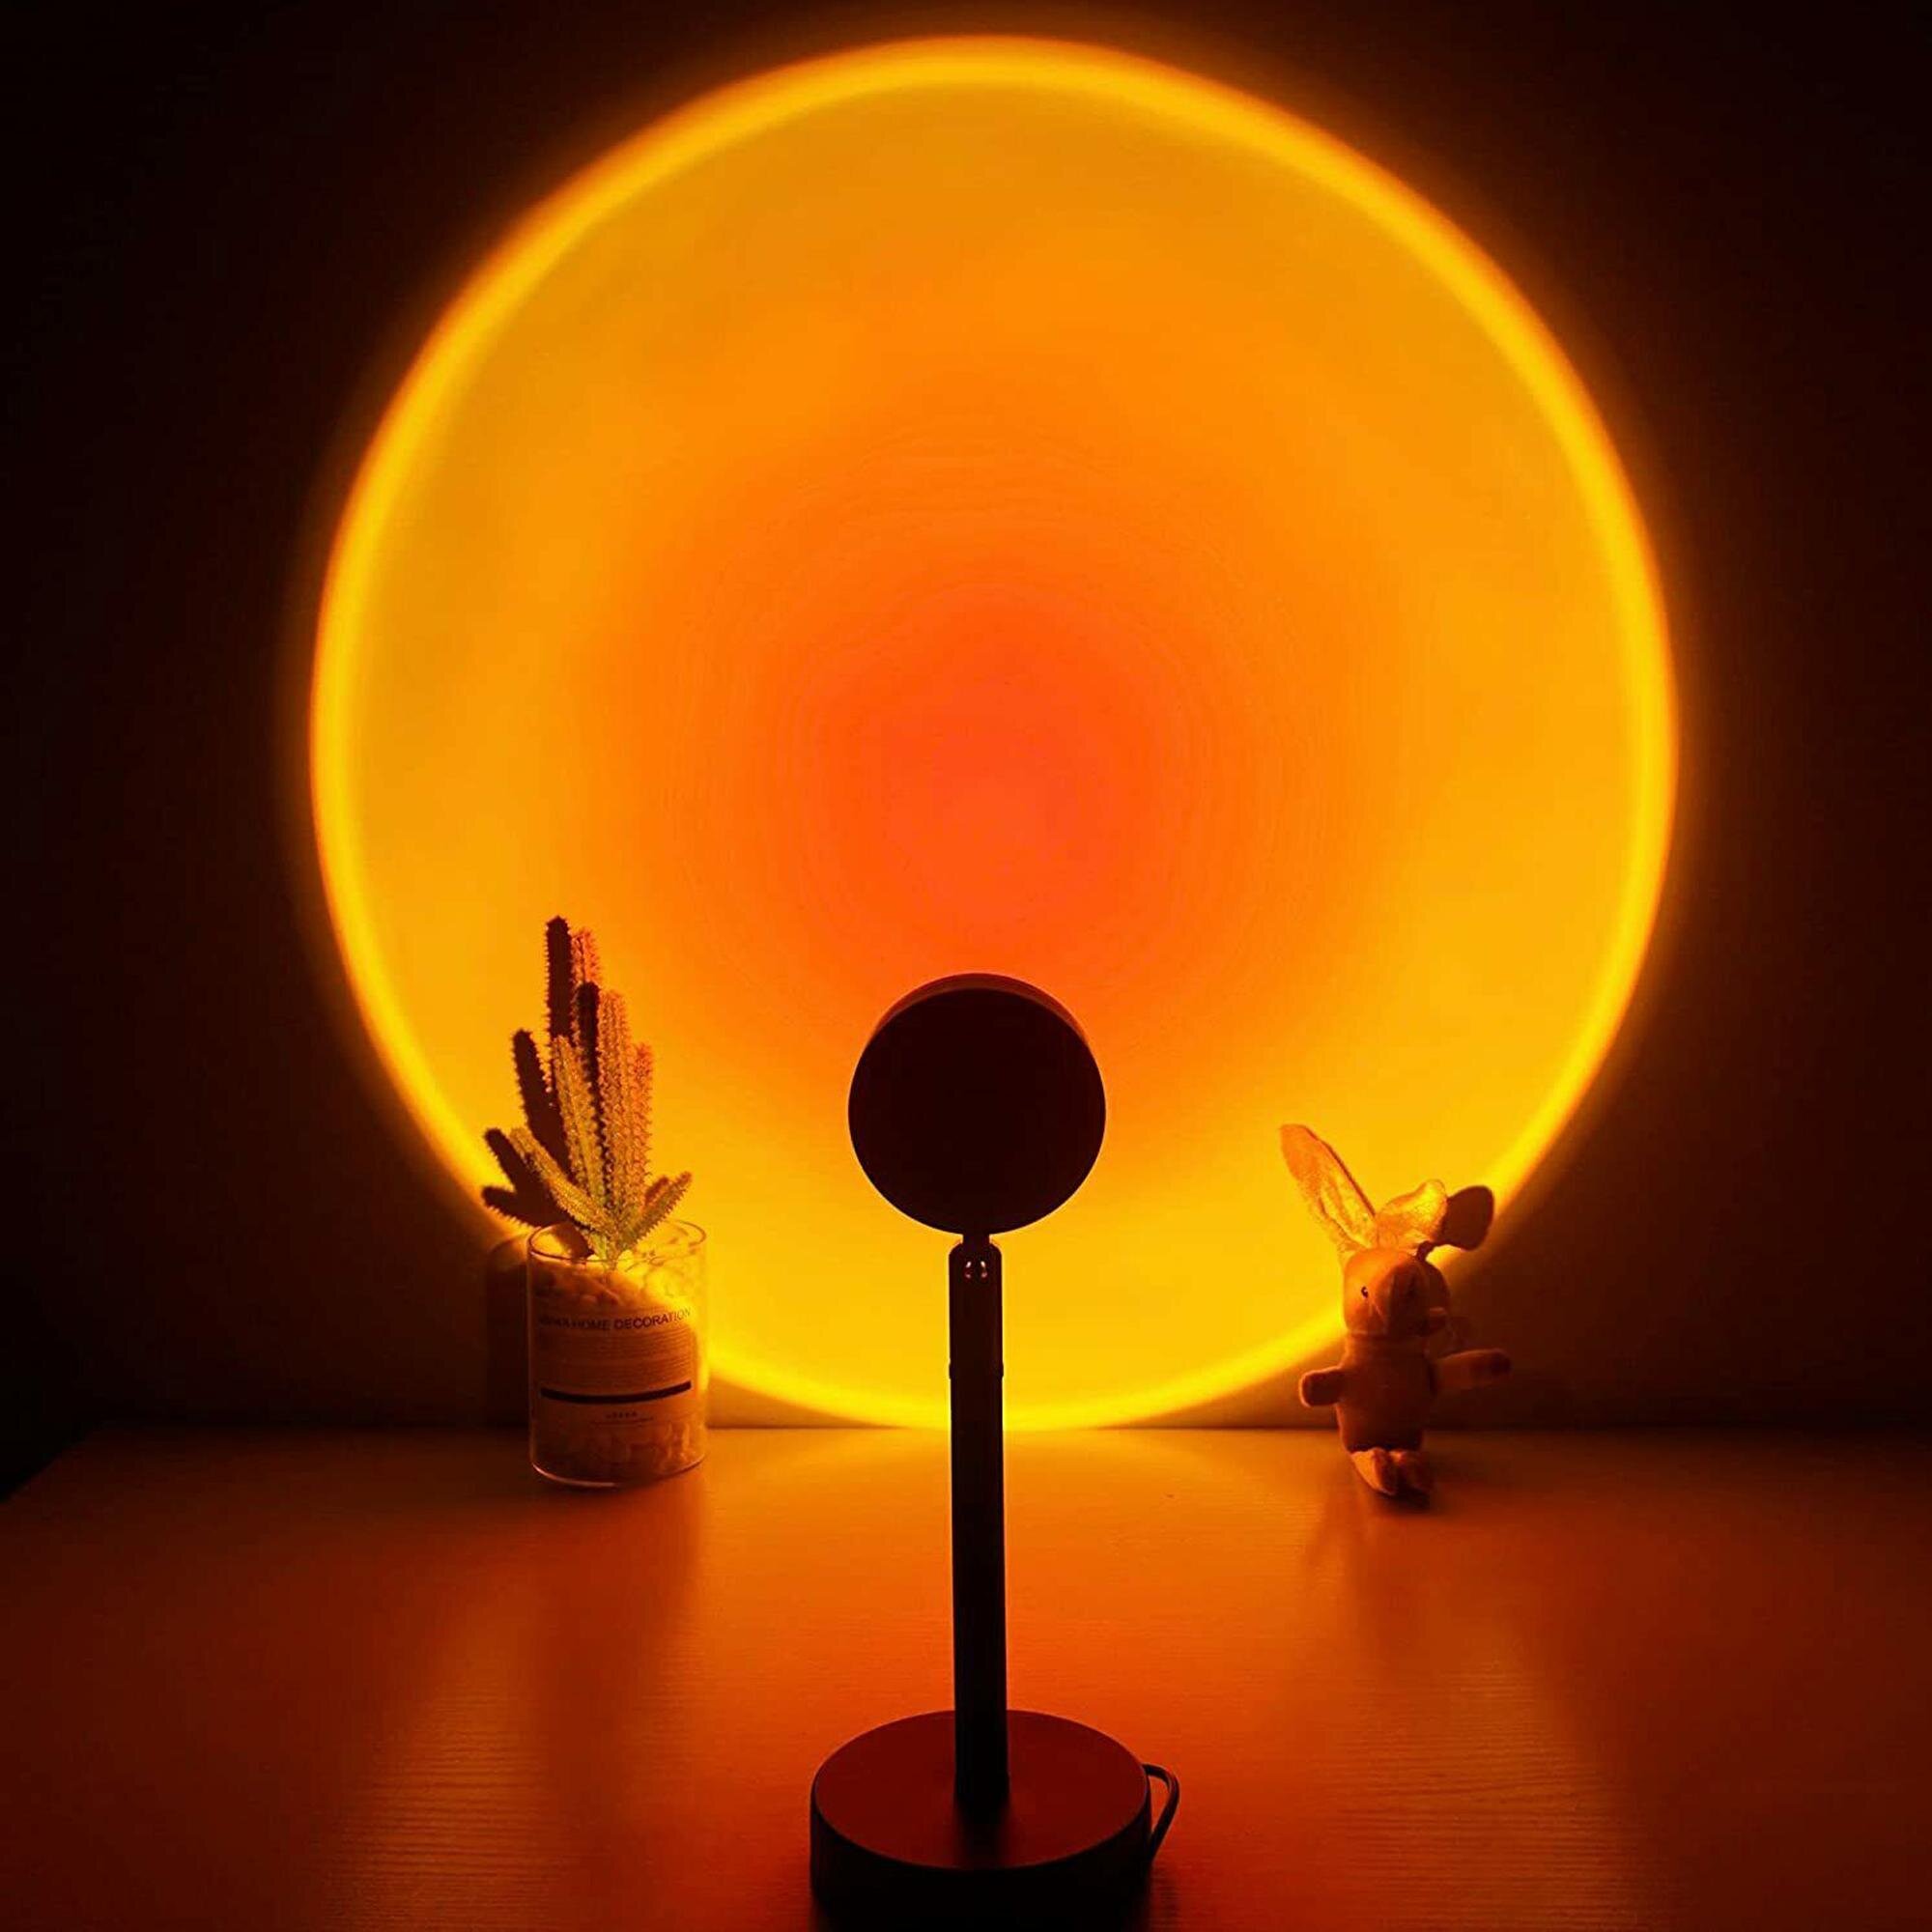 Details about   RainbowLED Night Light USB Port Sunset Projection Lamp 360 Degree Rotation 